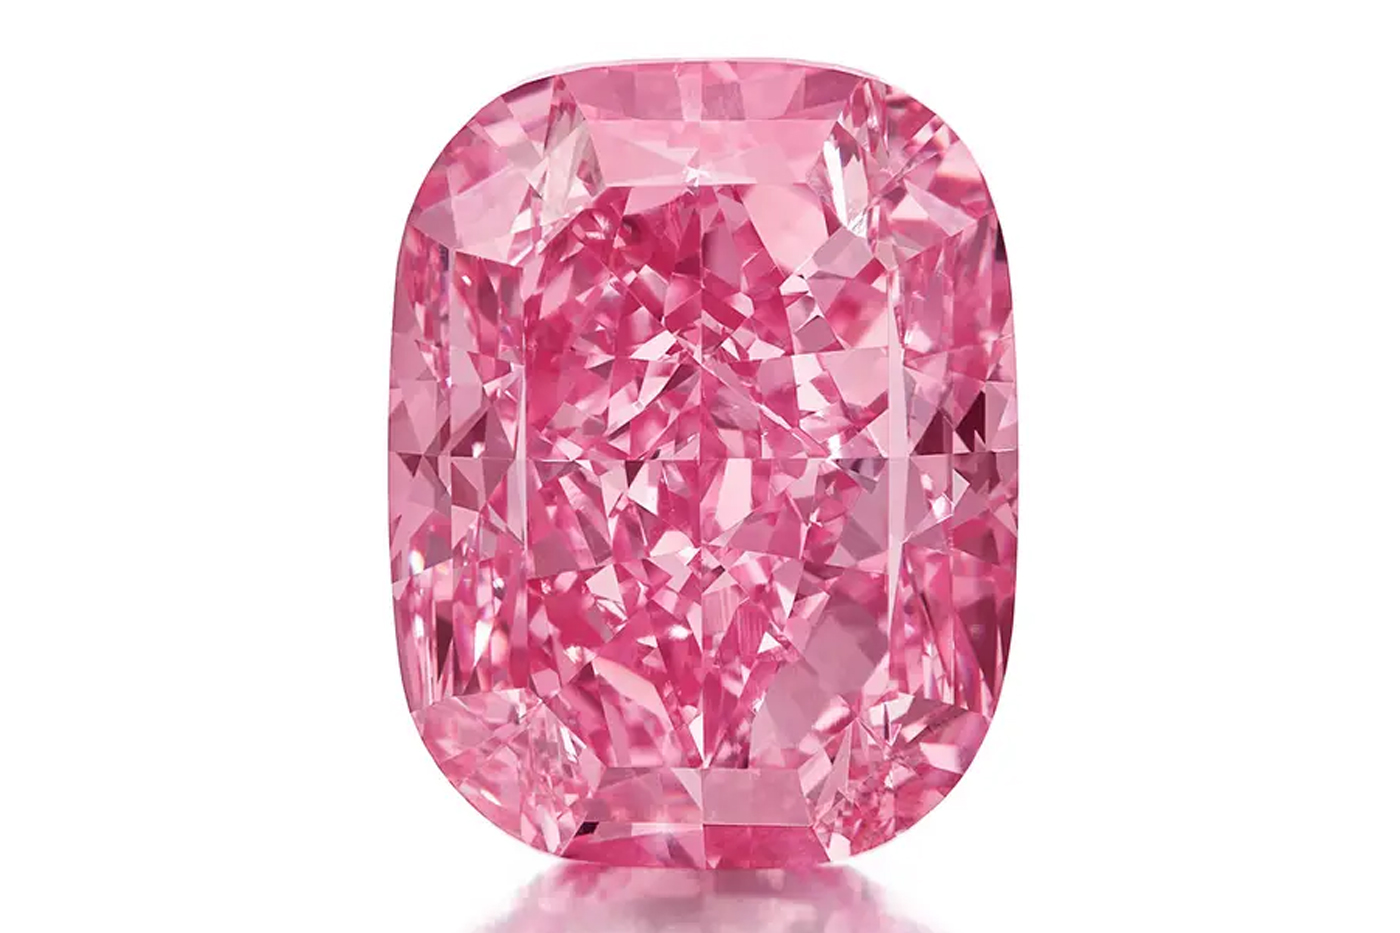 Ultra-Rare Pink Diamond Heads to Auction, Expected To Sell for Over $35 Million USD hong kong the eternal pink de beers jewelry gemstone rocks